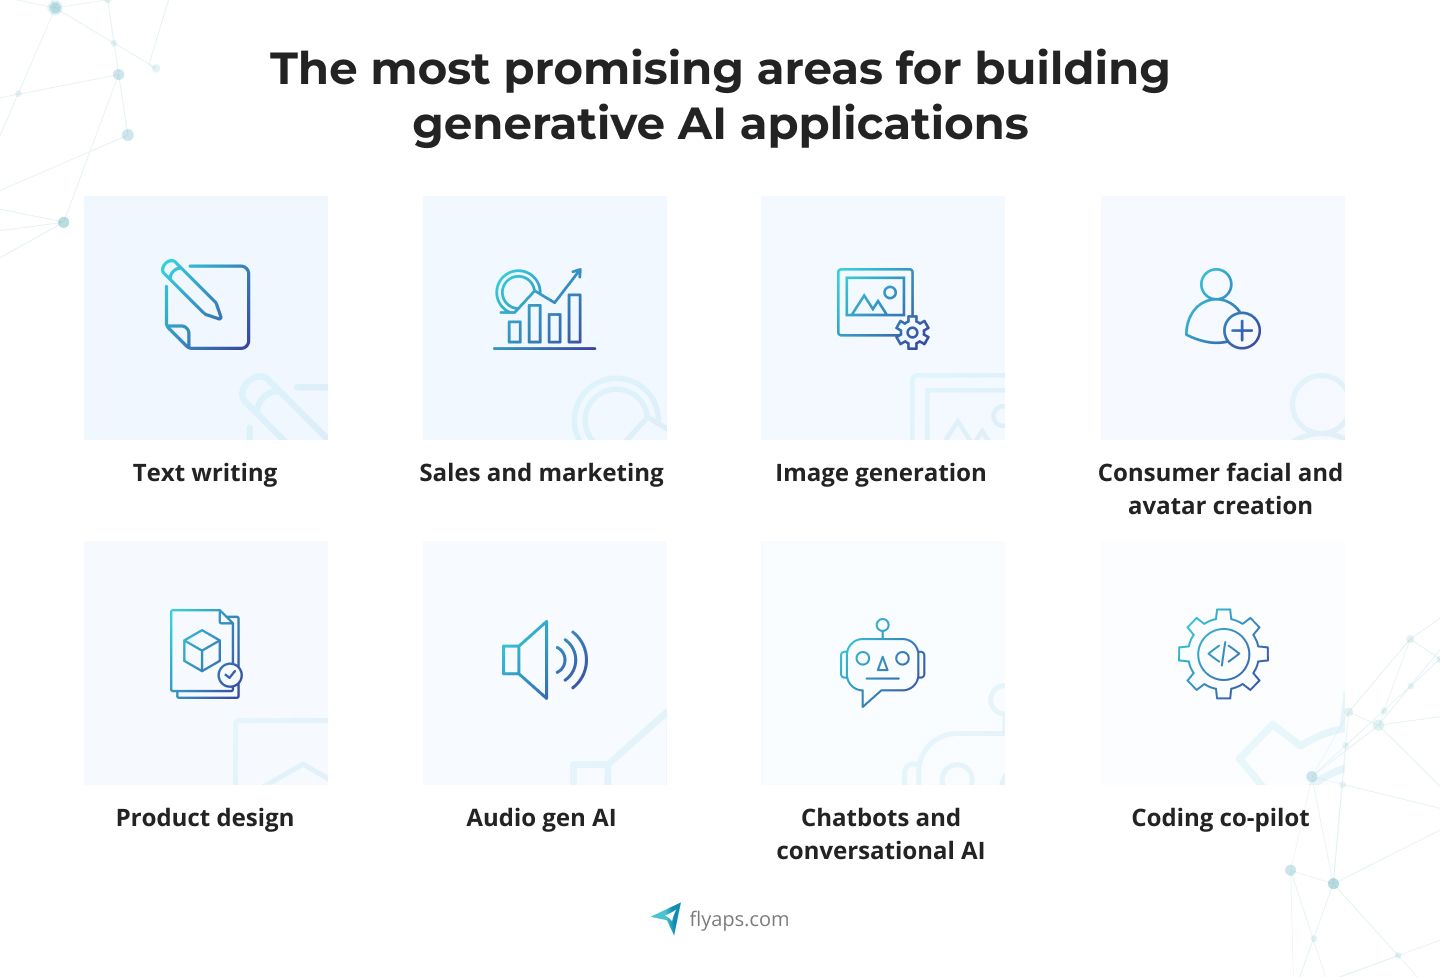 The most promising areas for building generative AI applications